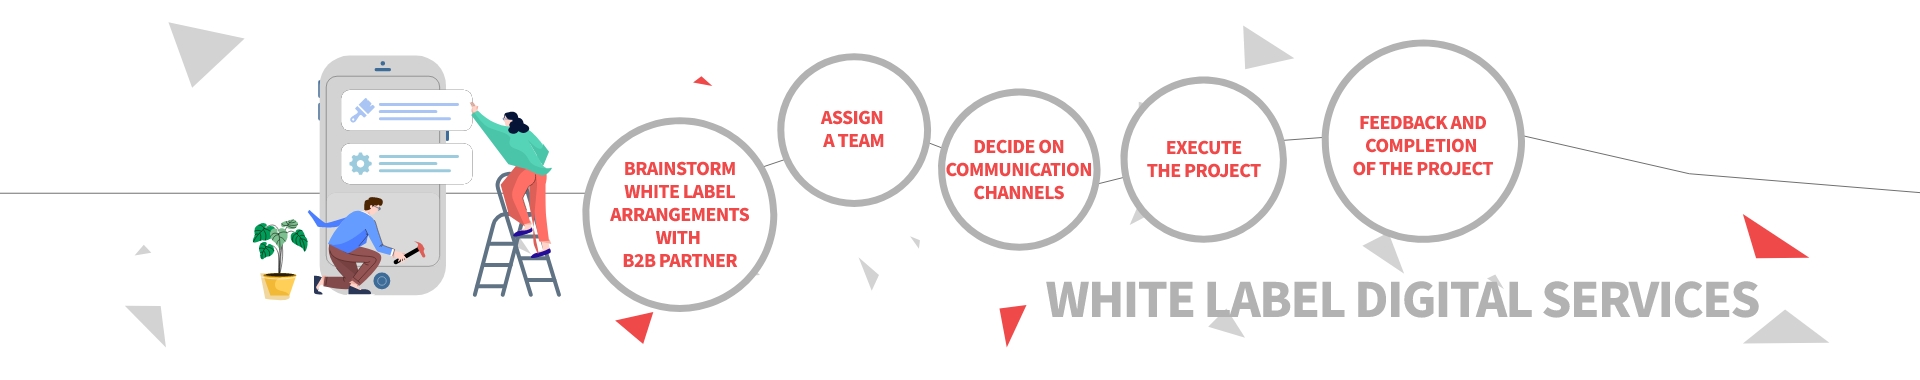 White Label Digital Services Workflow - ColorWhistle